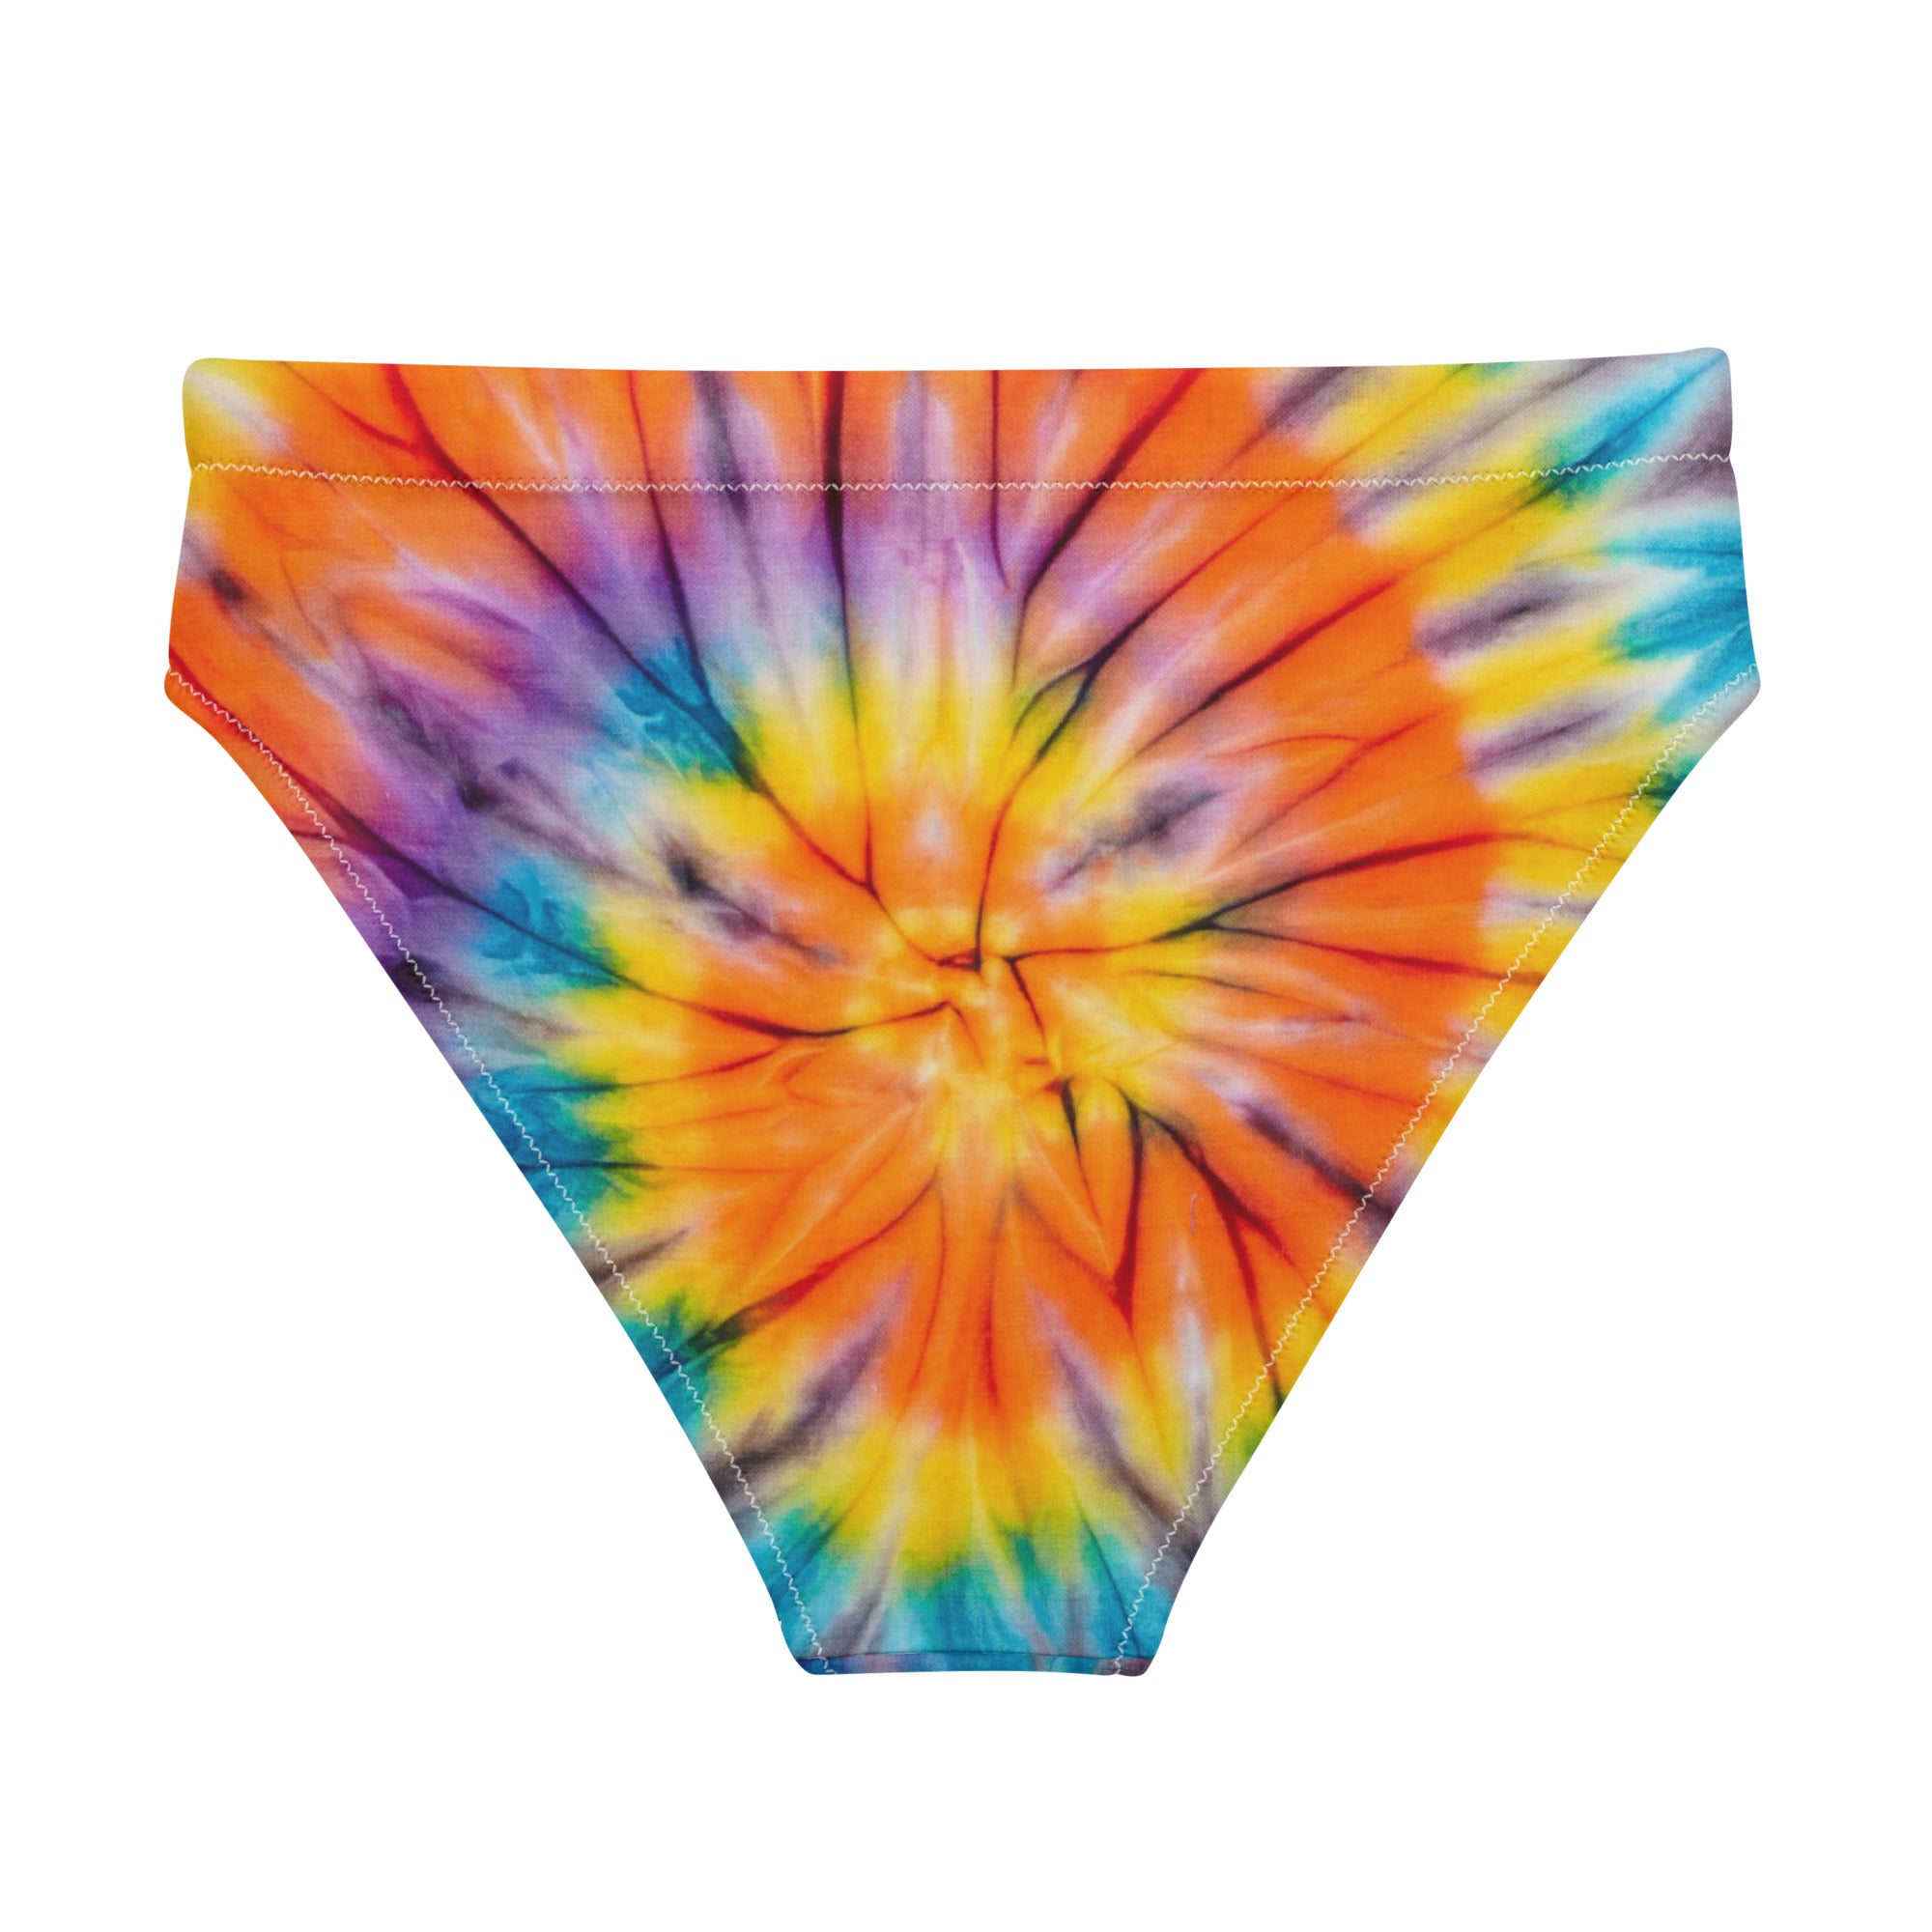 The eye-catching tie-dye pattern adds a fun and playful touch to your swimwear collection, while the adjustable side ties allow for a customizable fit. 